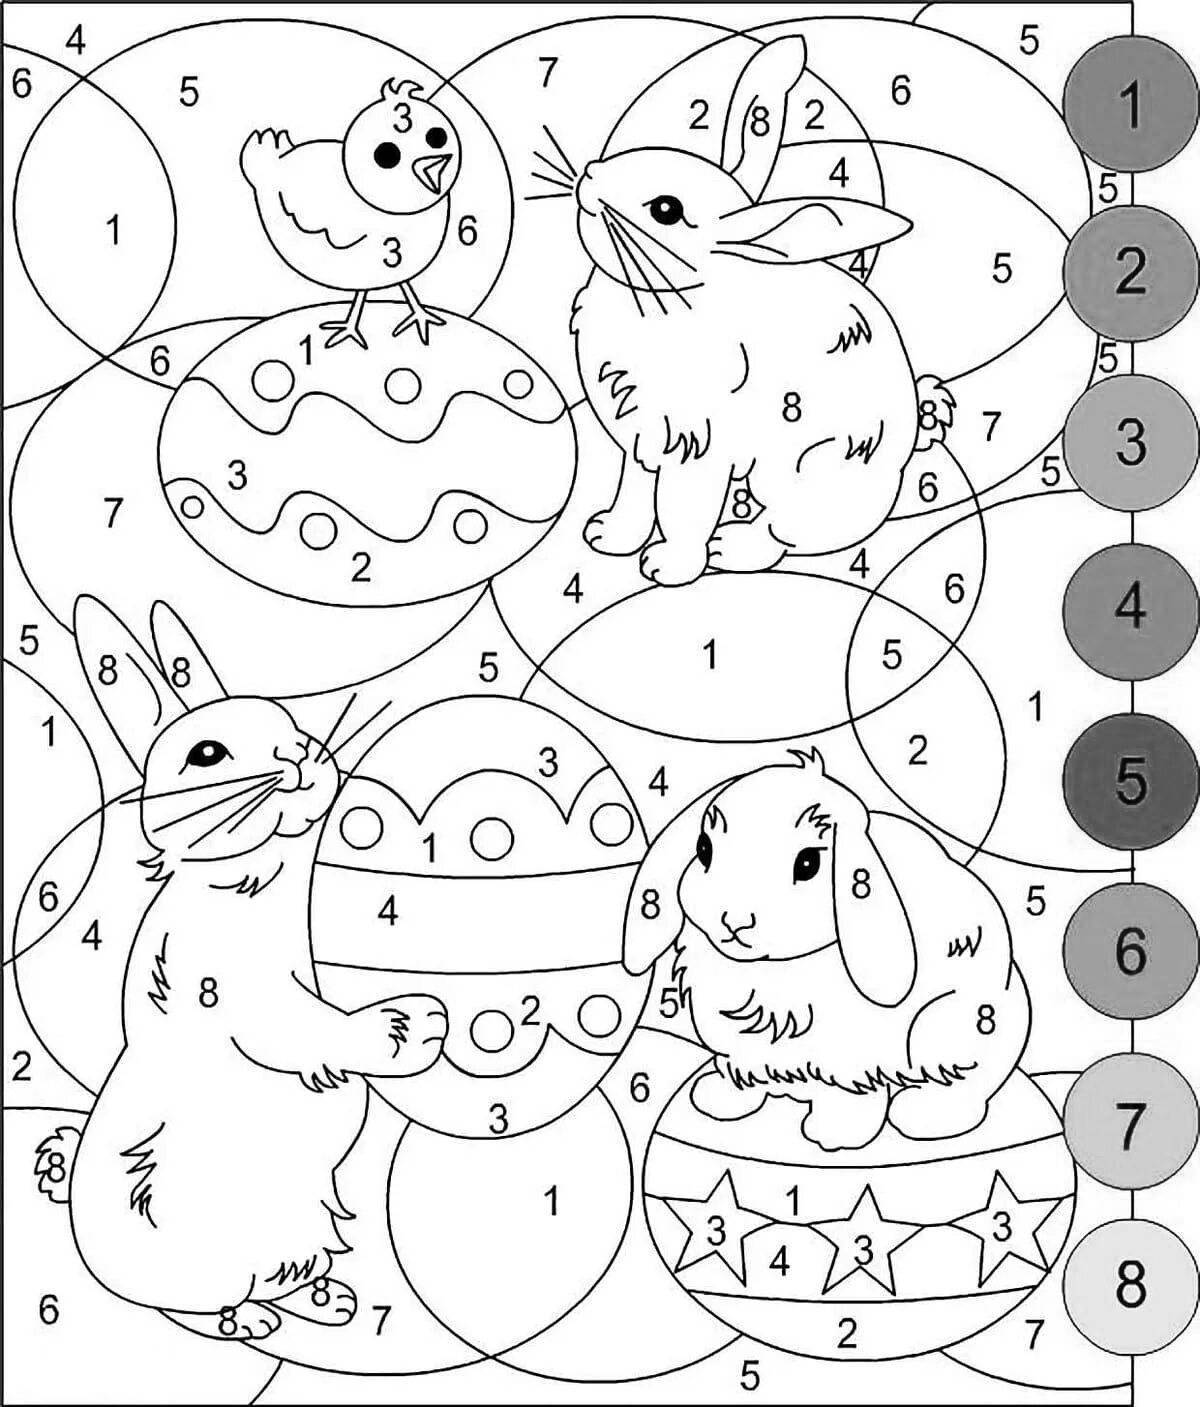 Coloring with numbers for children's play